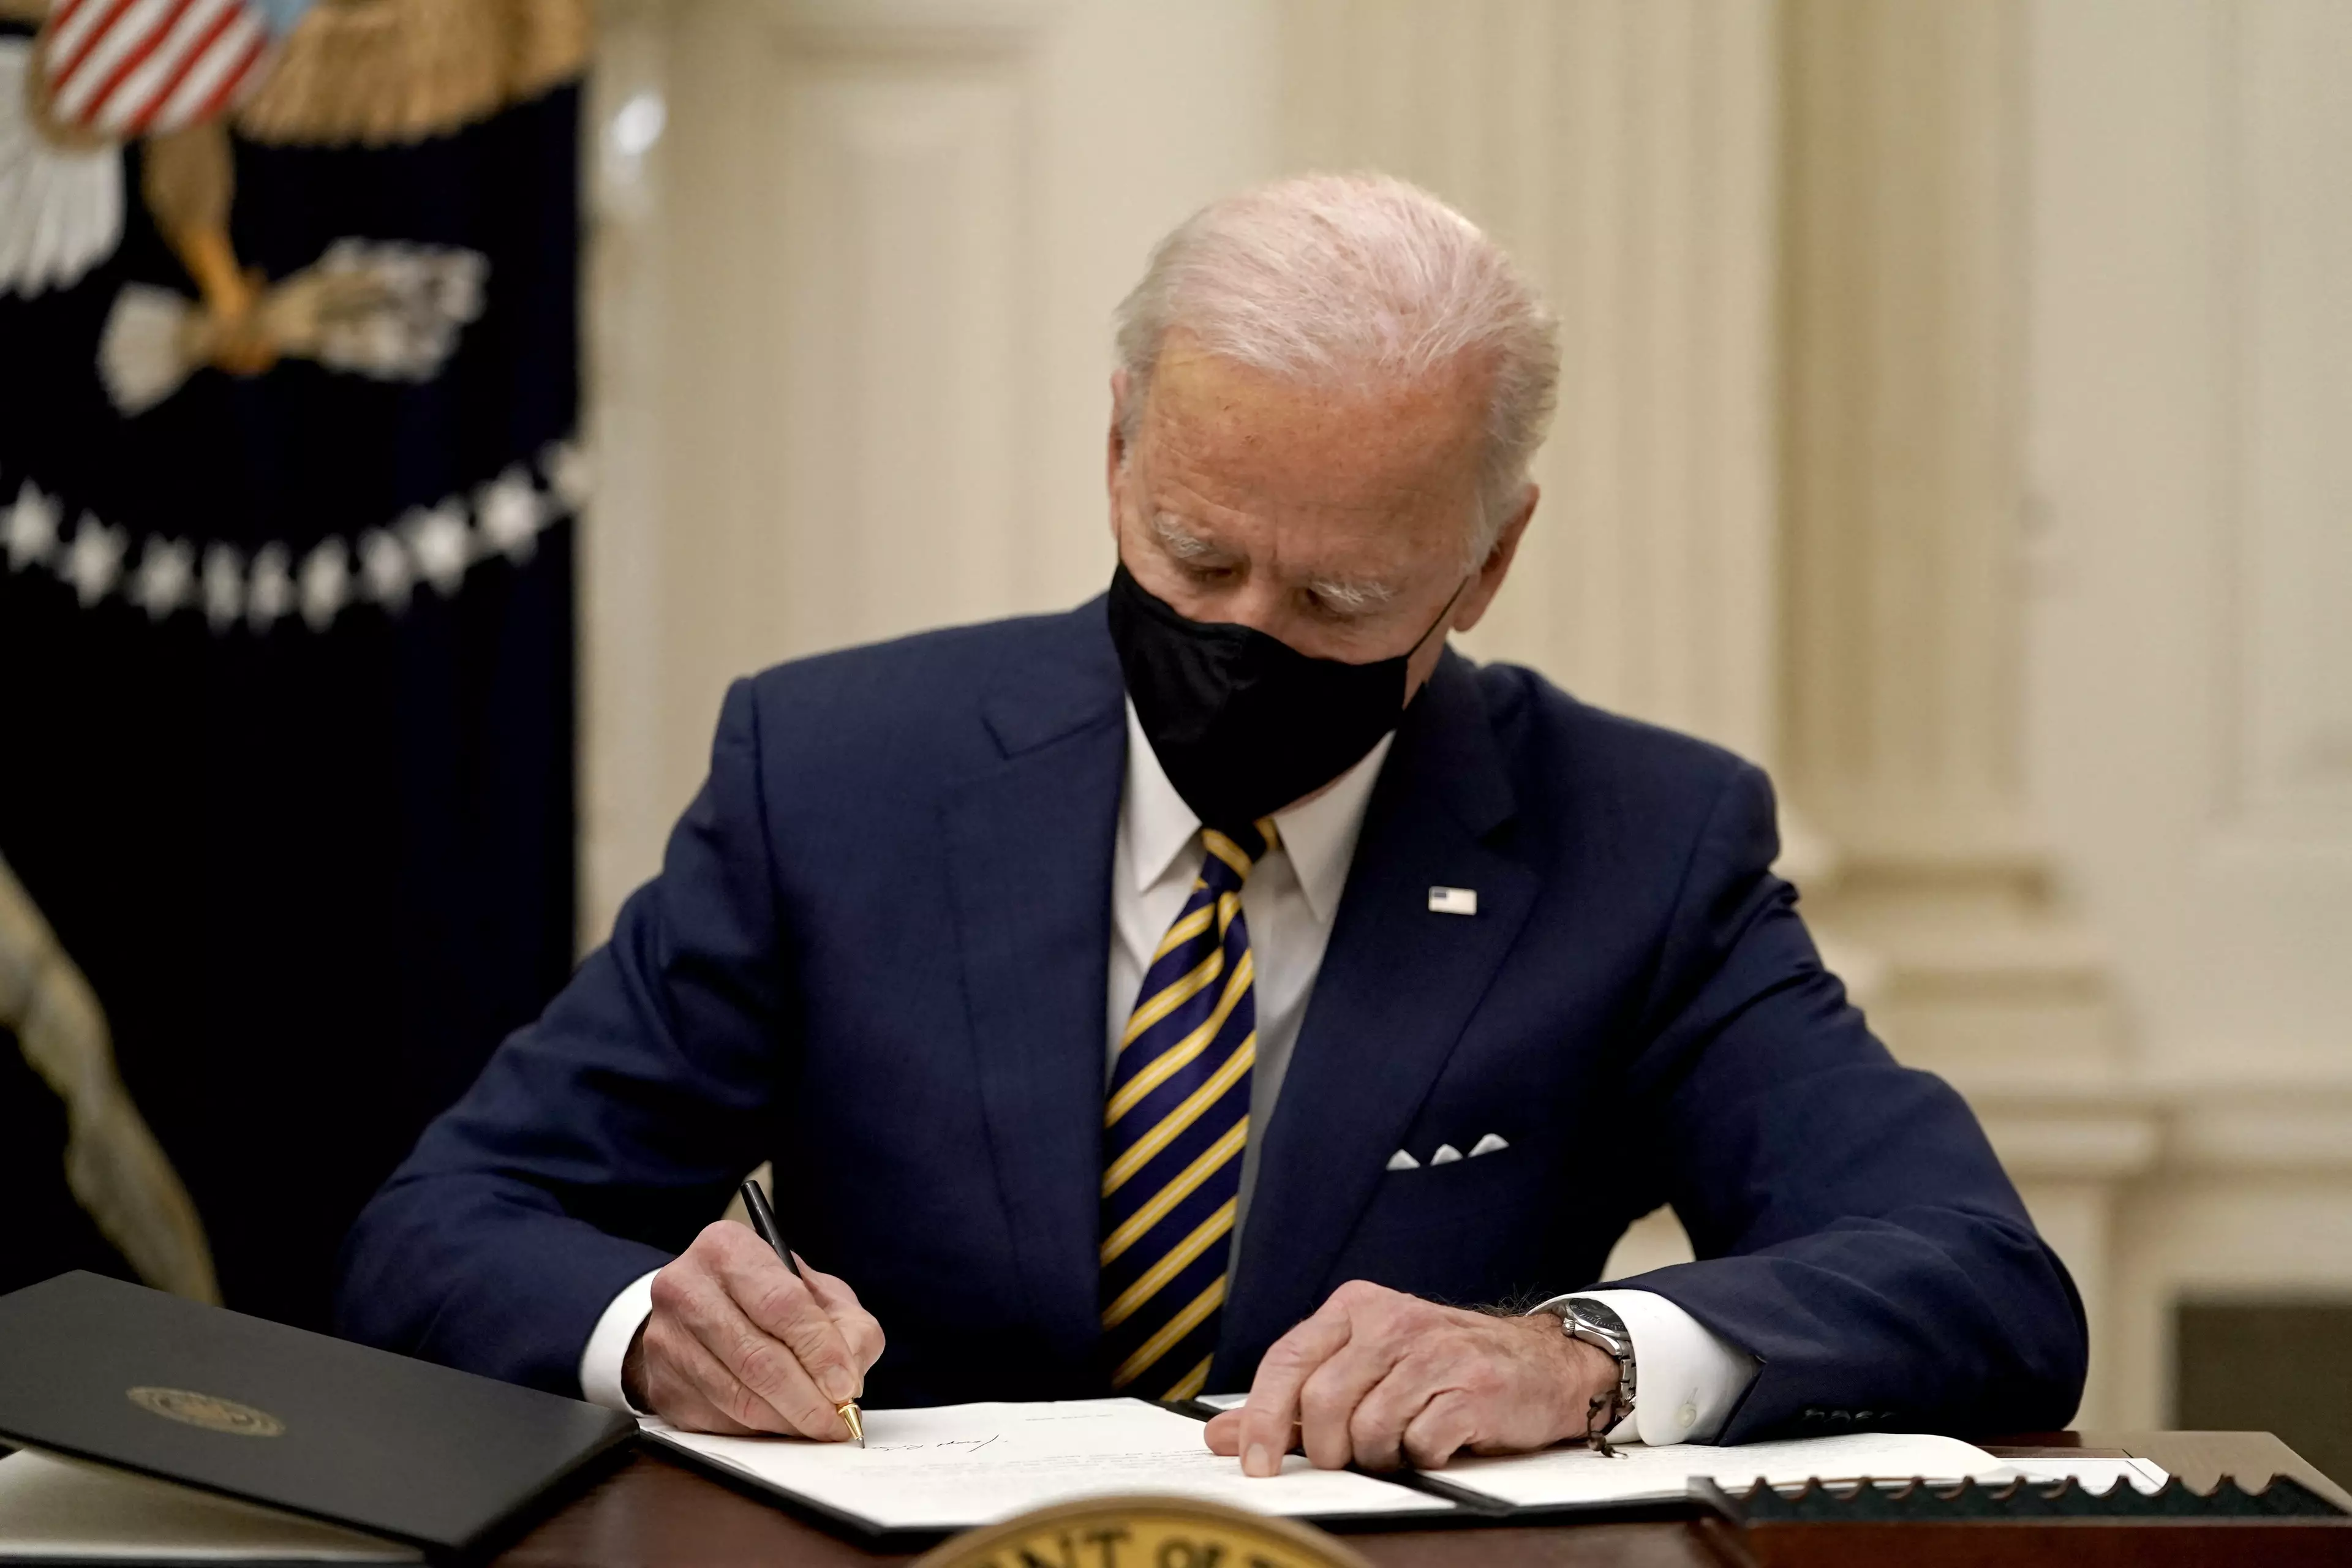 Joe Biden is expected to sign an executive order reversing the ban on transgender people serving in the US military.